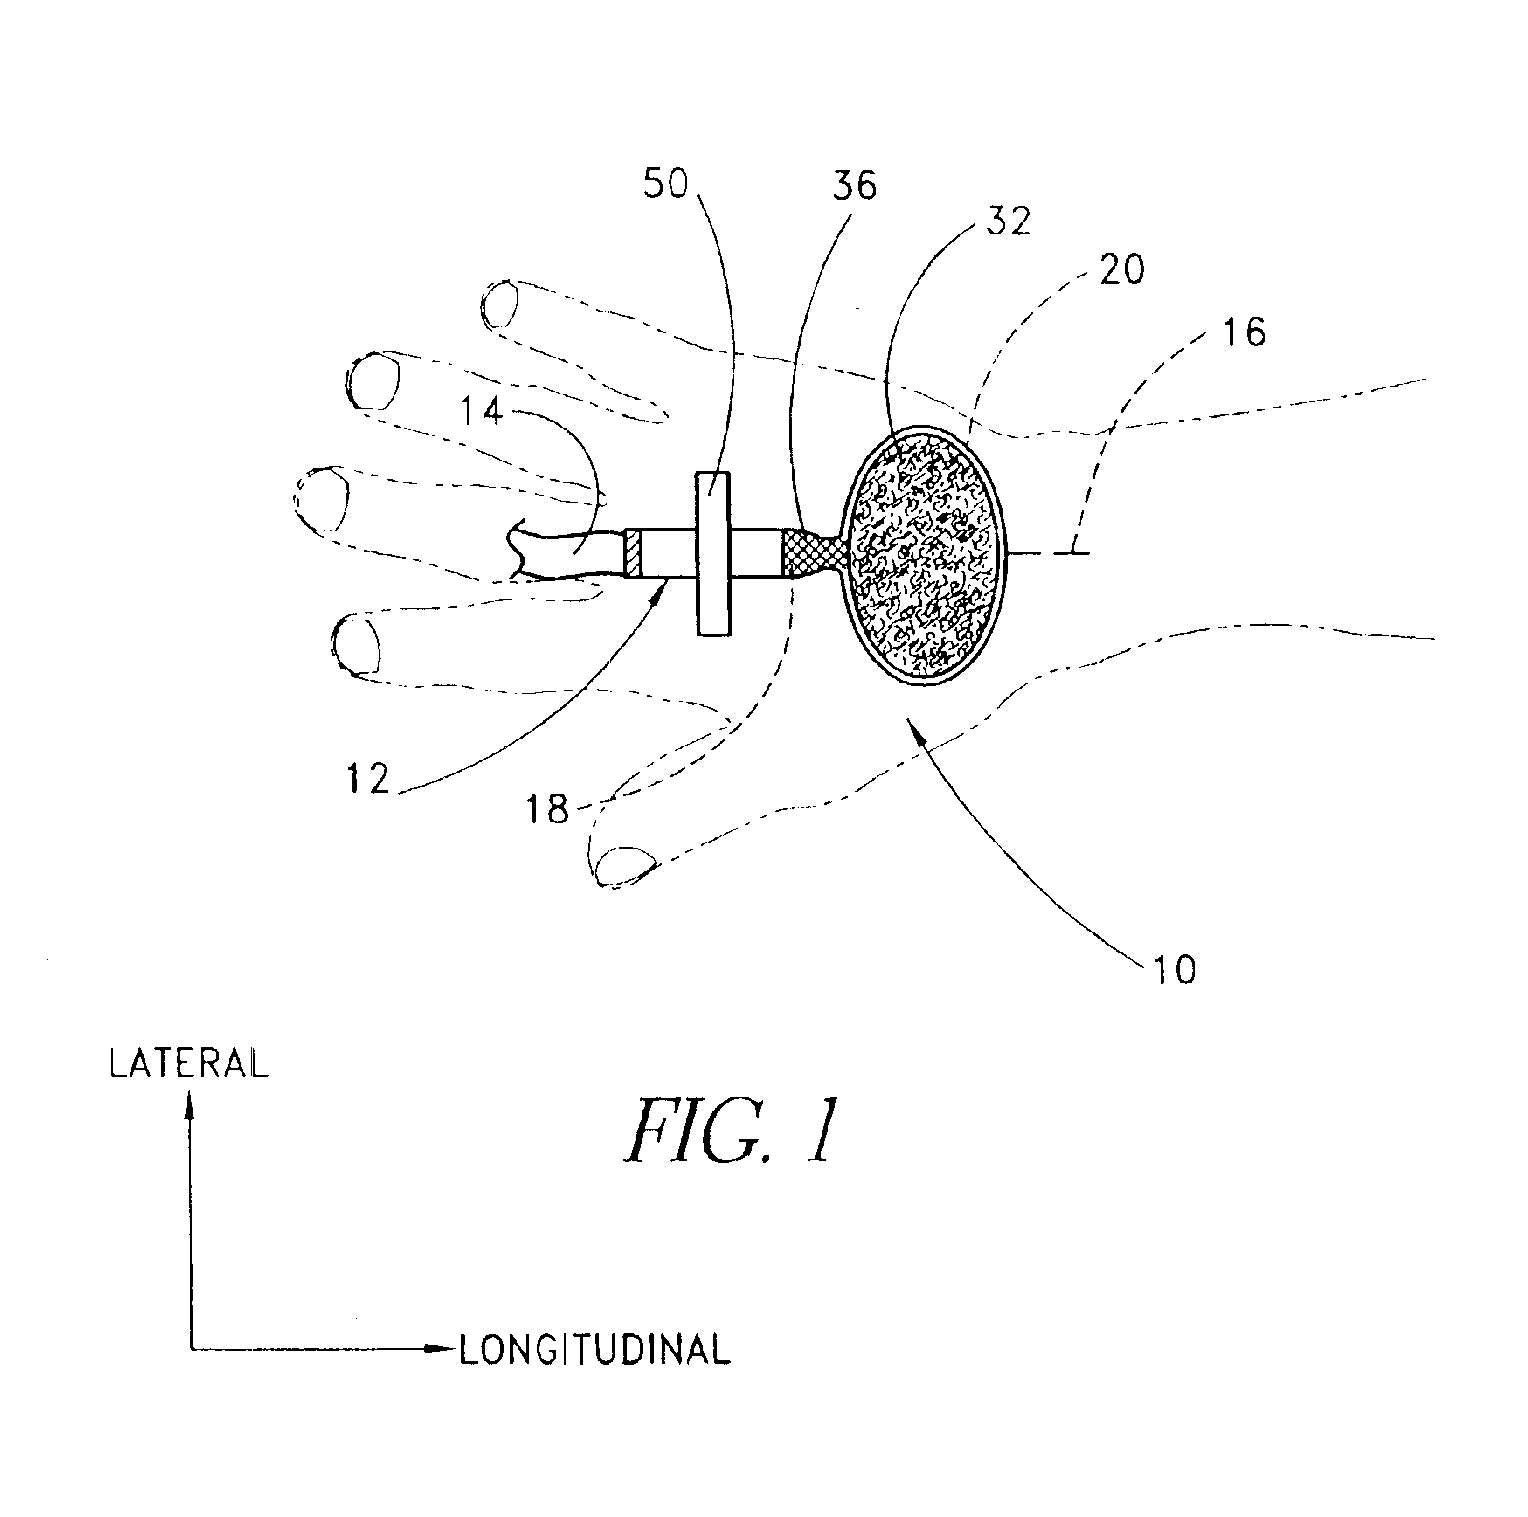 Medical line securement device for use with neonates